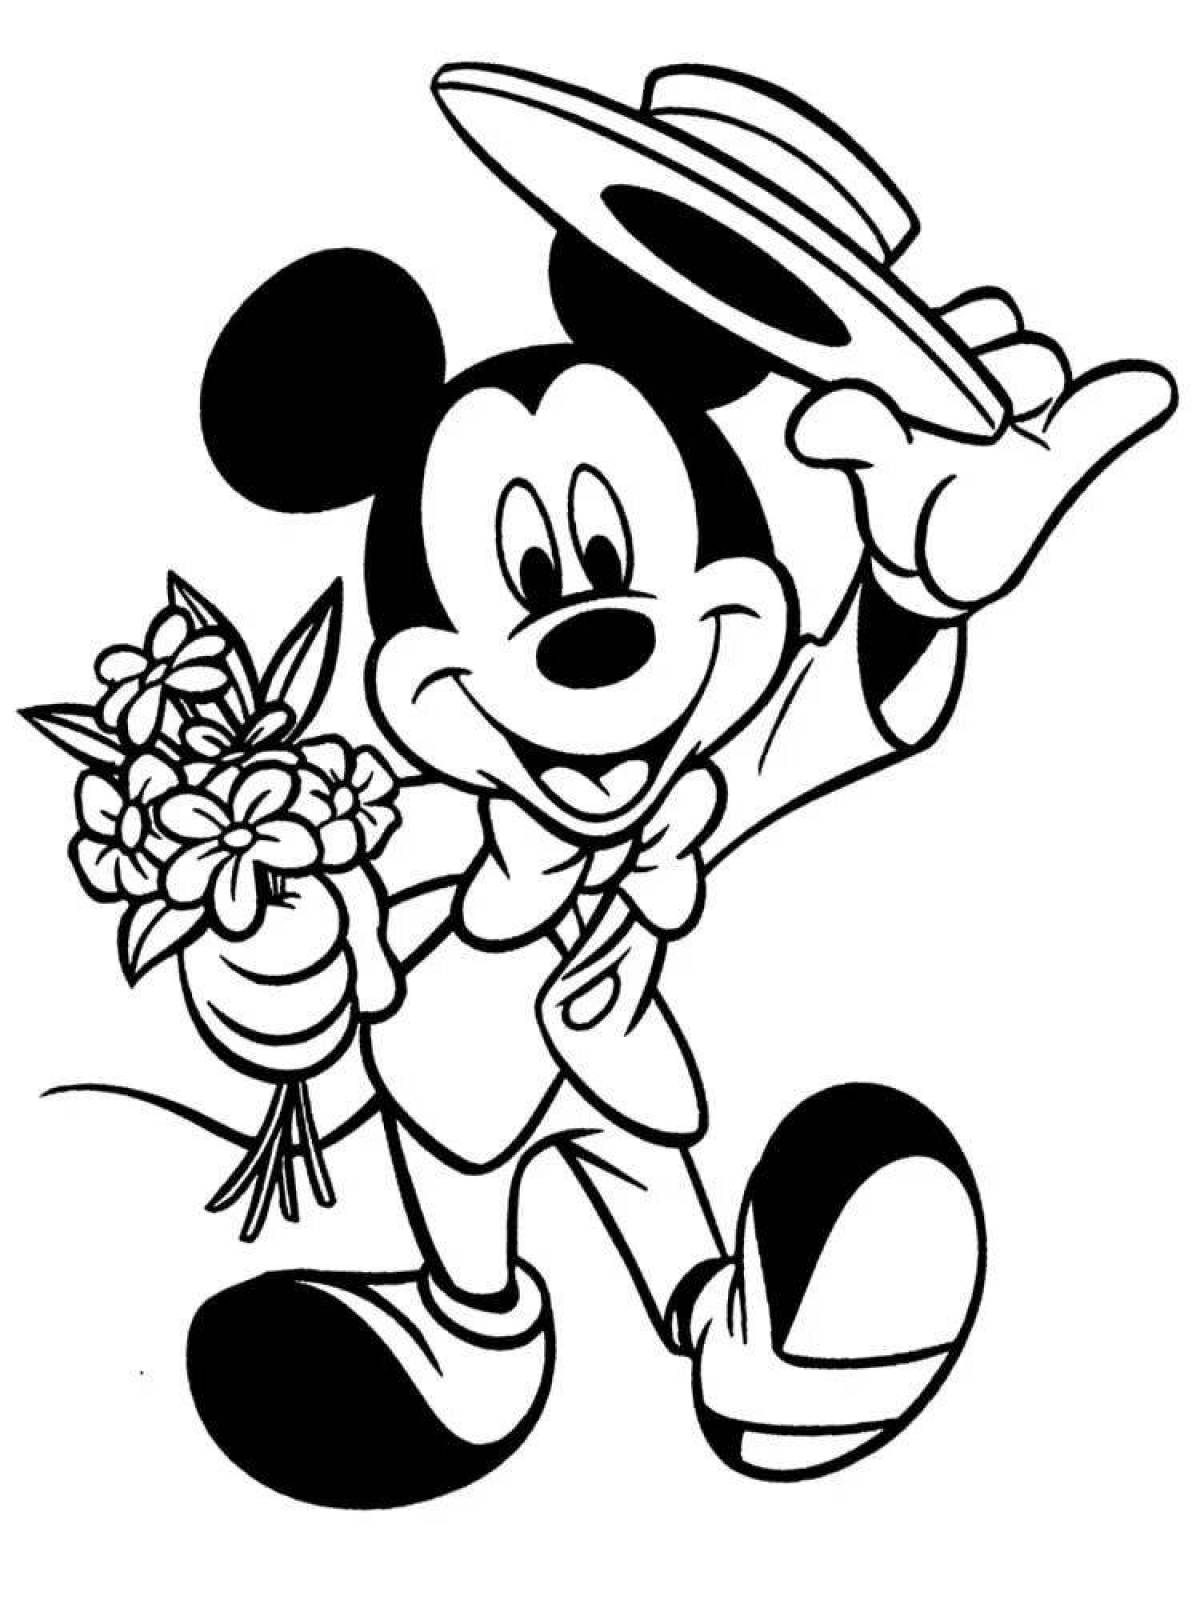 Mickey mouse fun coloring book for kids